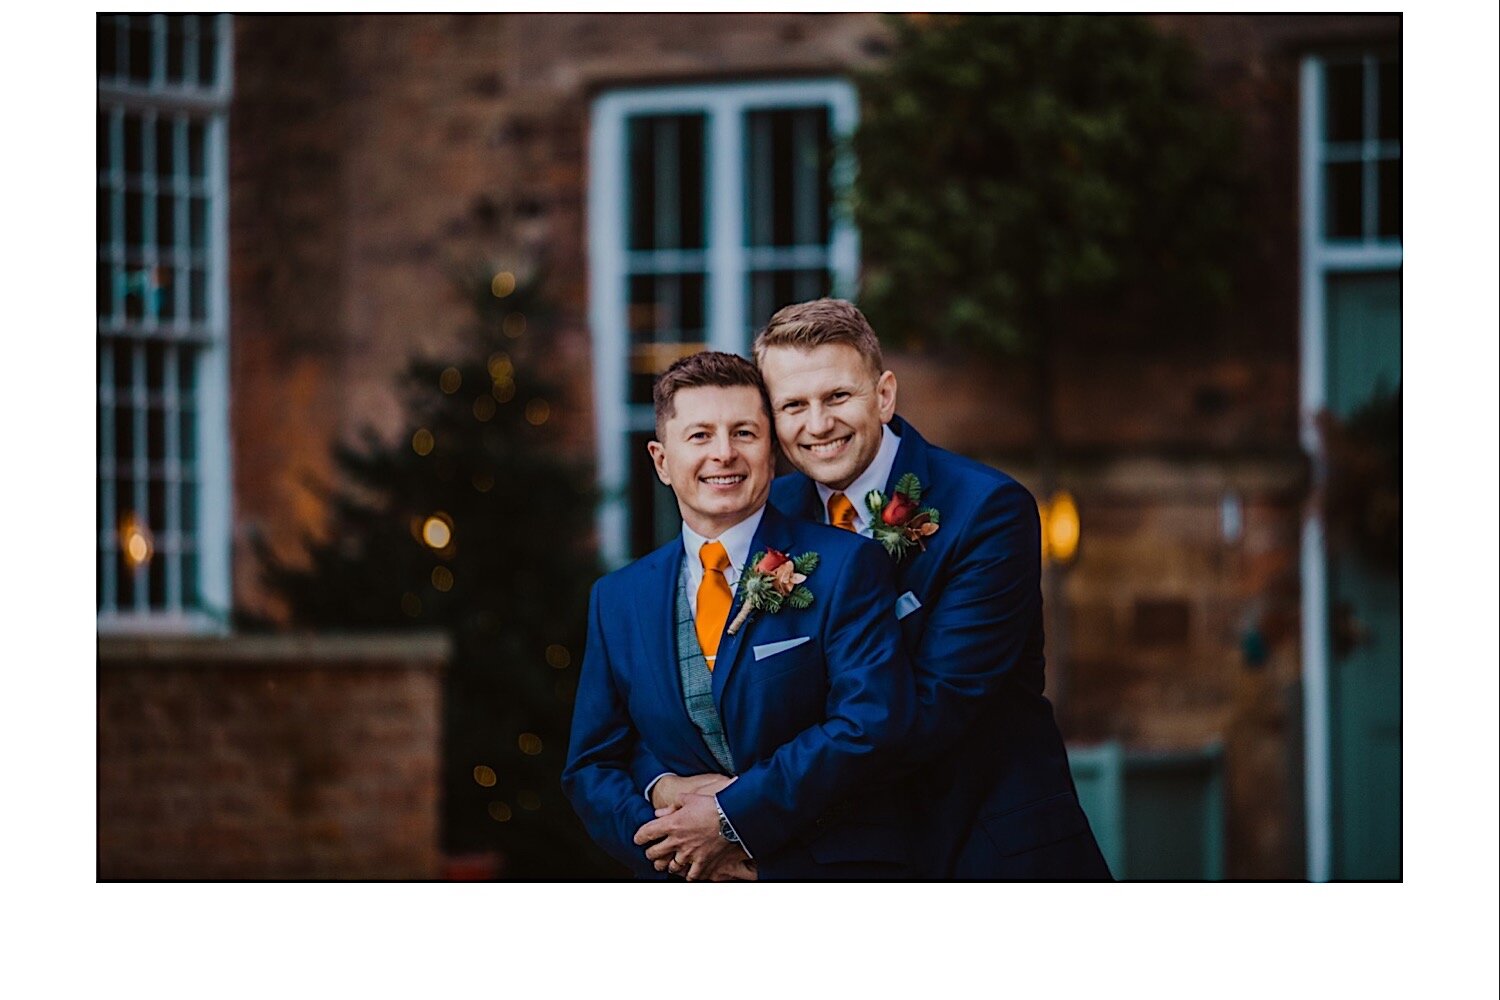 71_TWS-503_photographer_wedding_industrial_venue_gay_grooms_photography_chic_westmill_derby.jpg